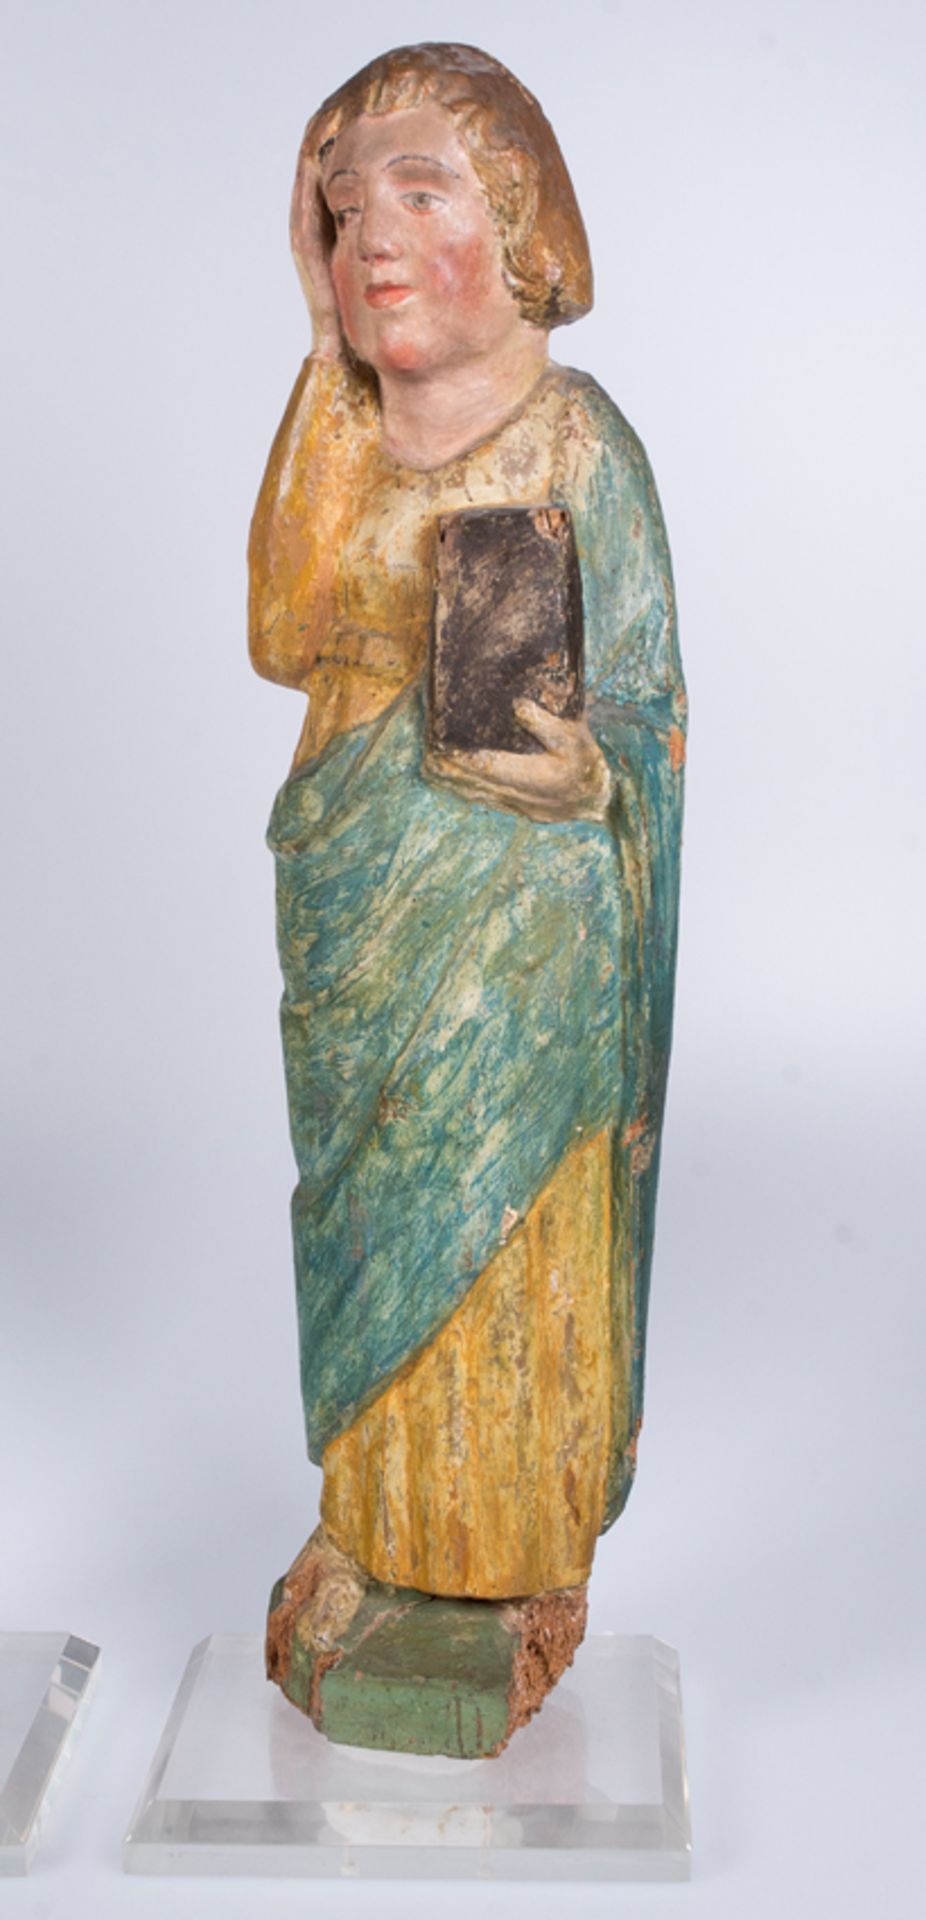 "The Virgin Mary" and "Saint John". Pair of wooden sculptures. ¿Castilian workshop? Late 13th cent. - Image 3 of 7